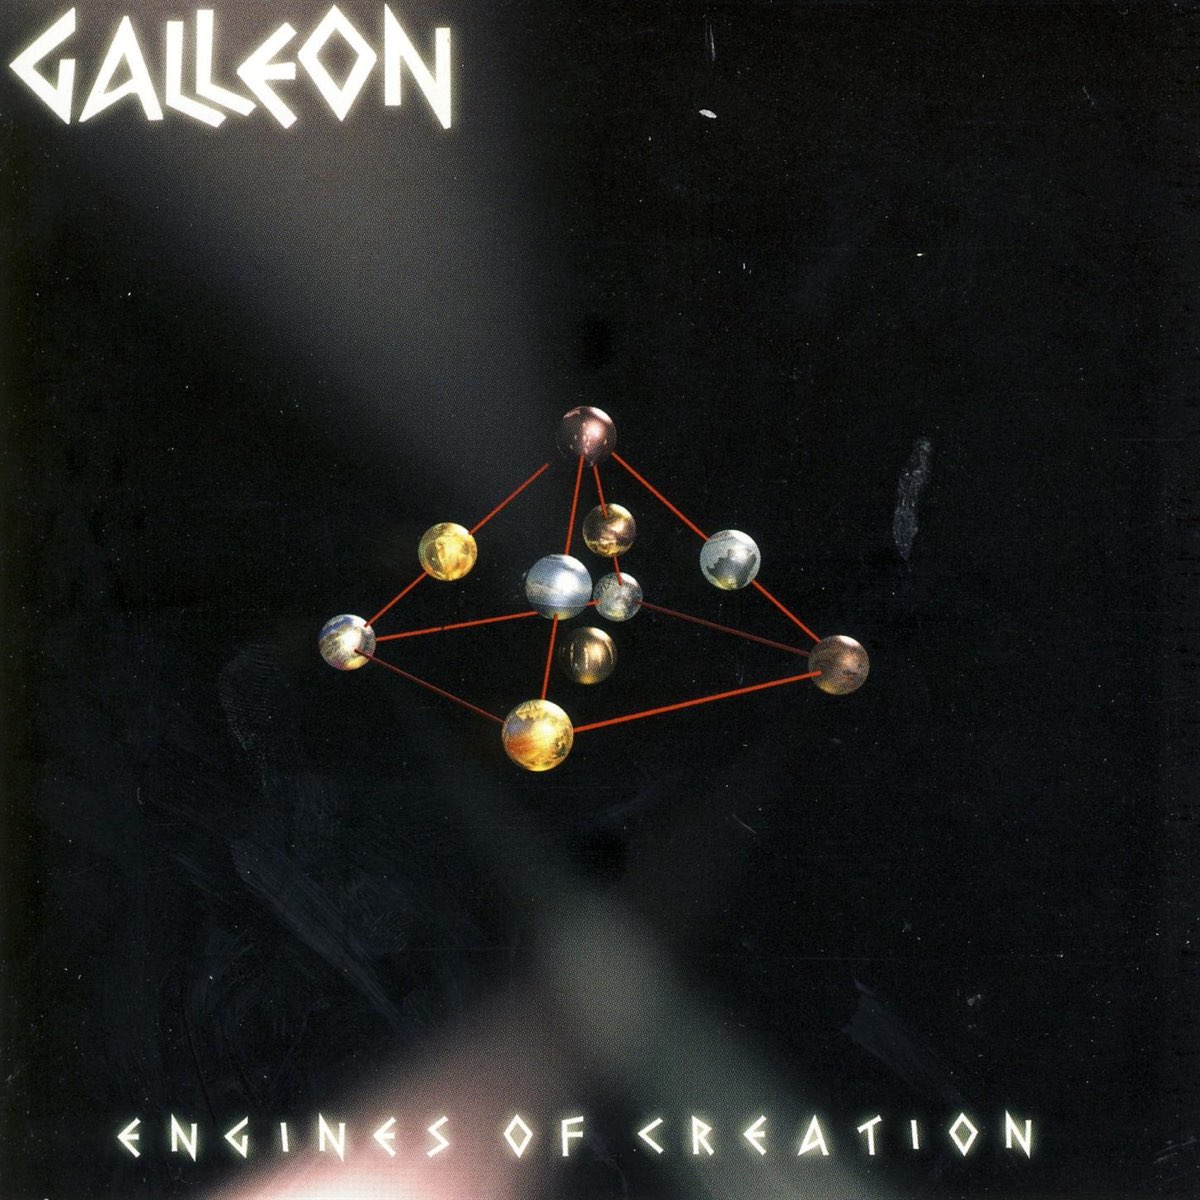 Engines of Creation - Album by Galleon - Apple Music